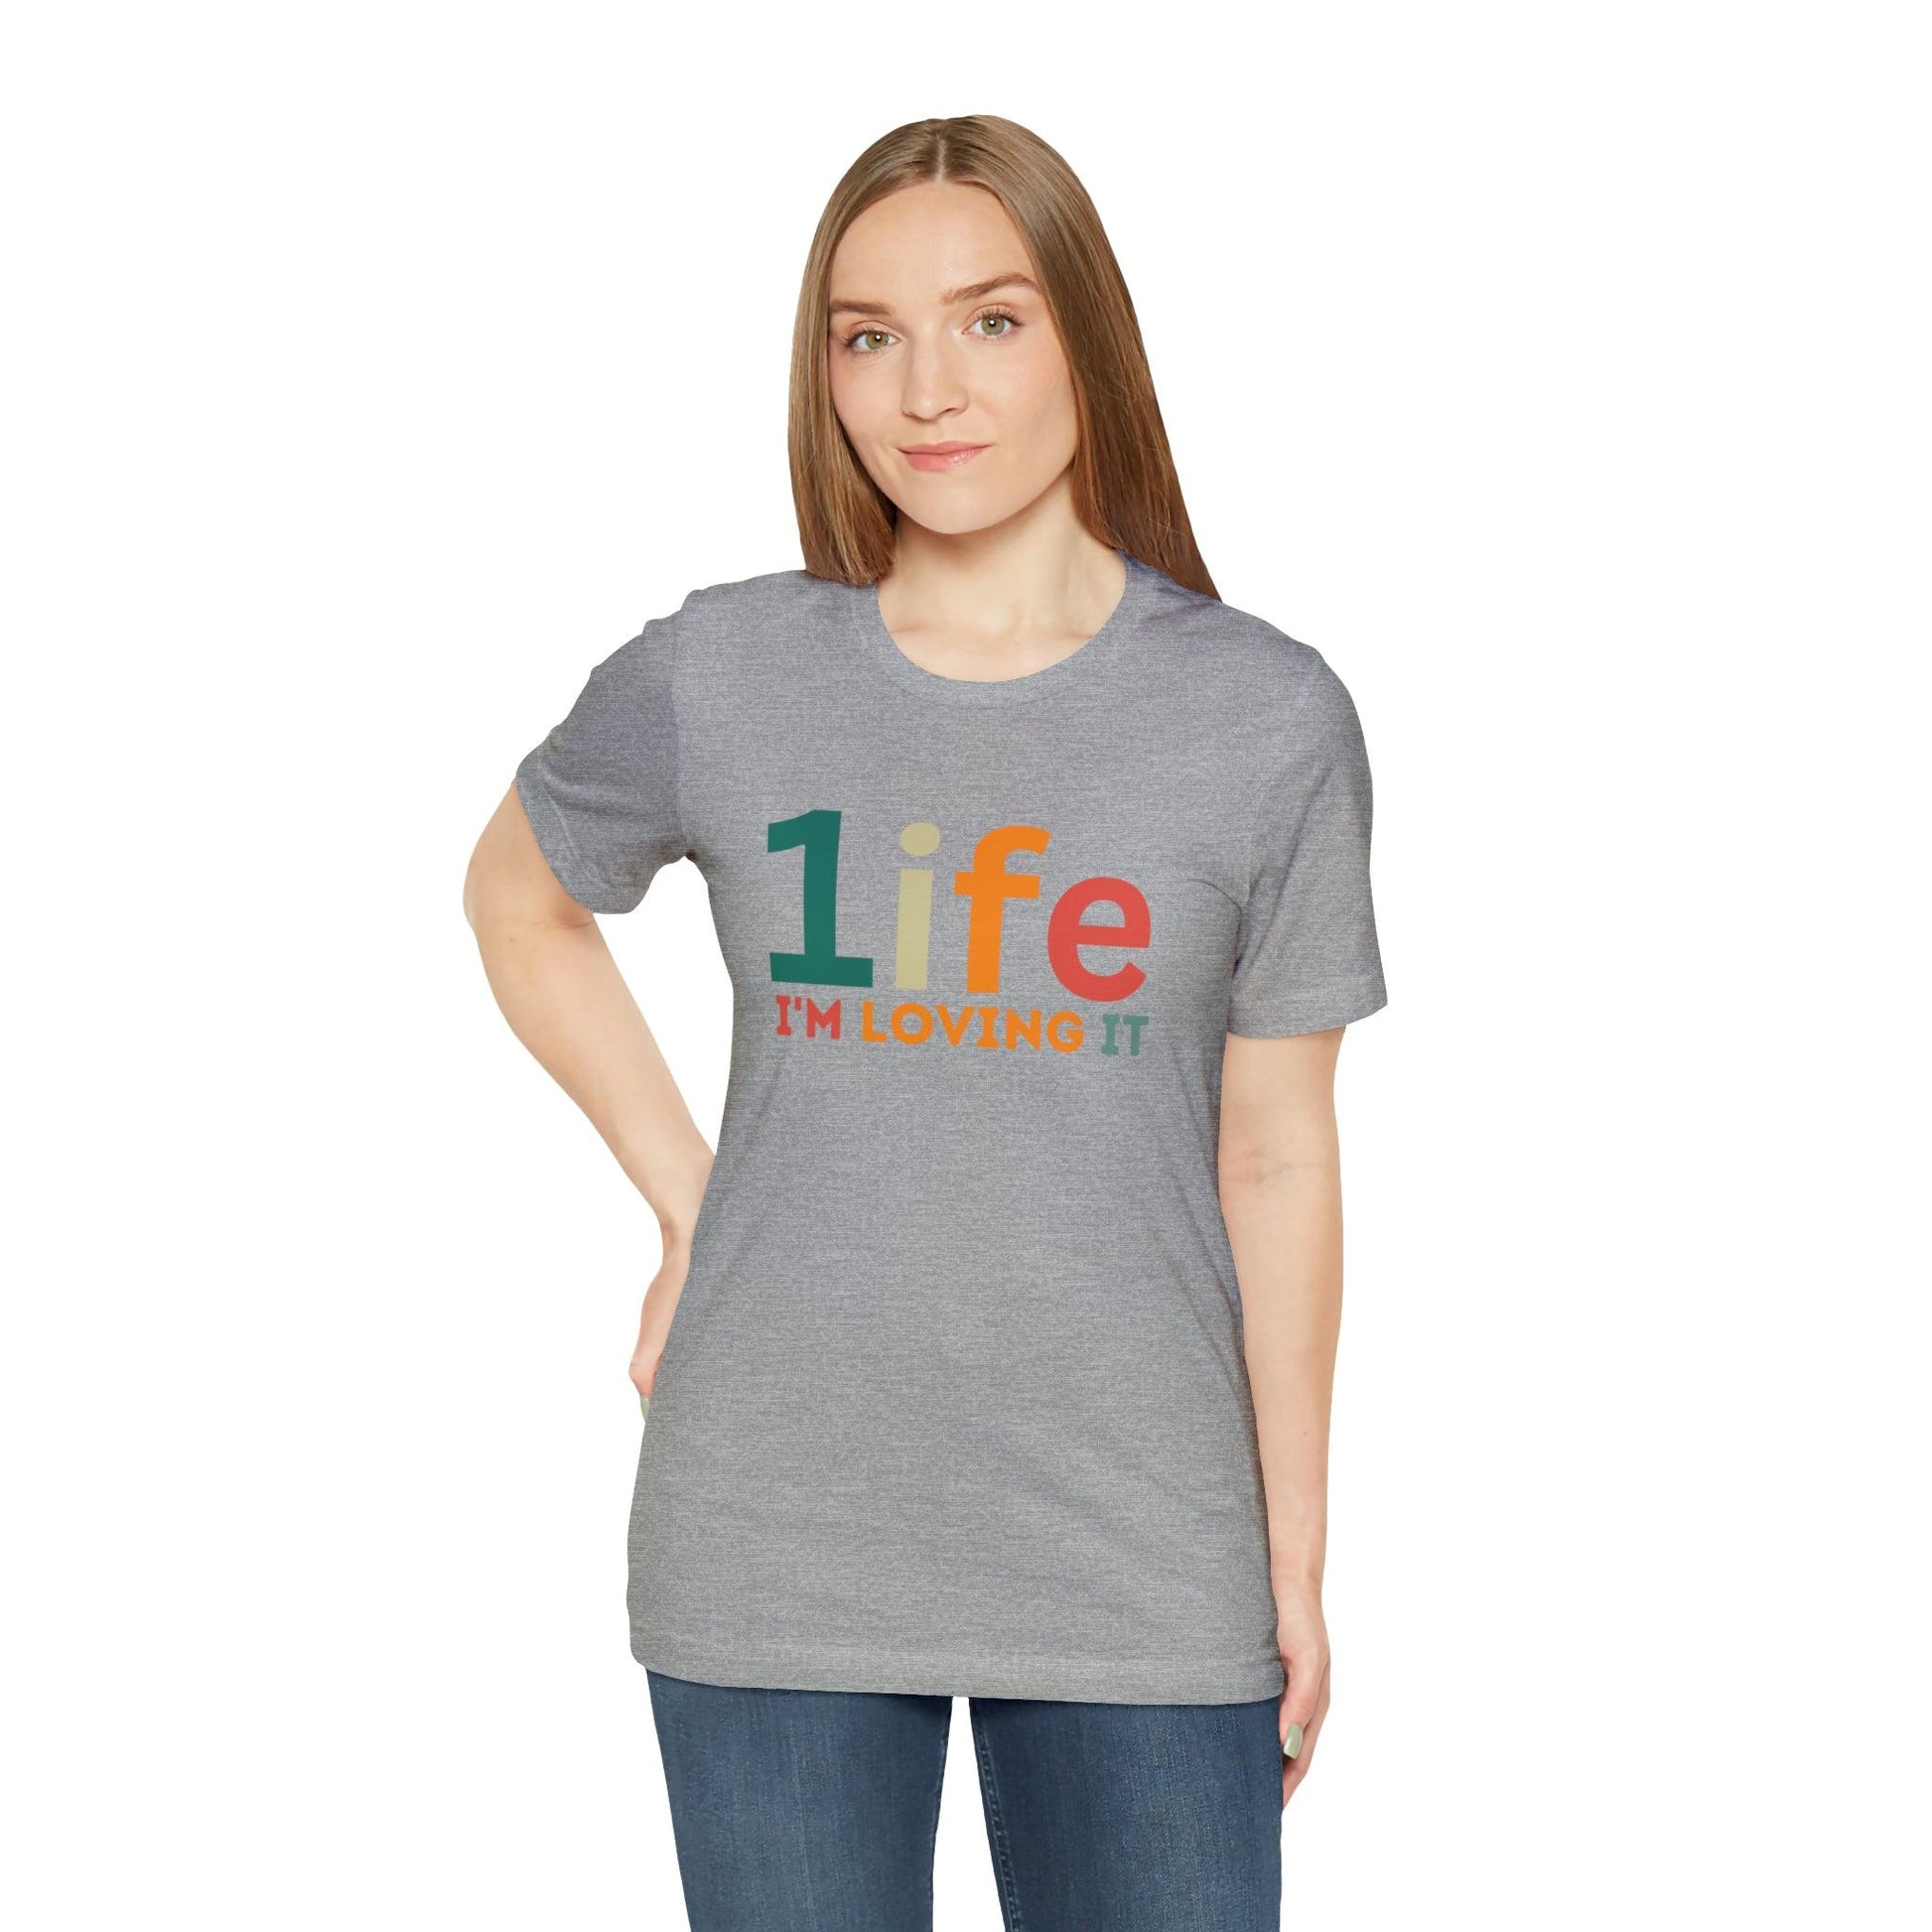 One life I'M Loving It Shirt Retro 1life shirt Live Your Life You Only Have One Life To Live Retro Shirt - Giftsmojo